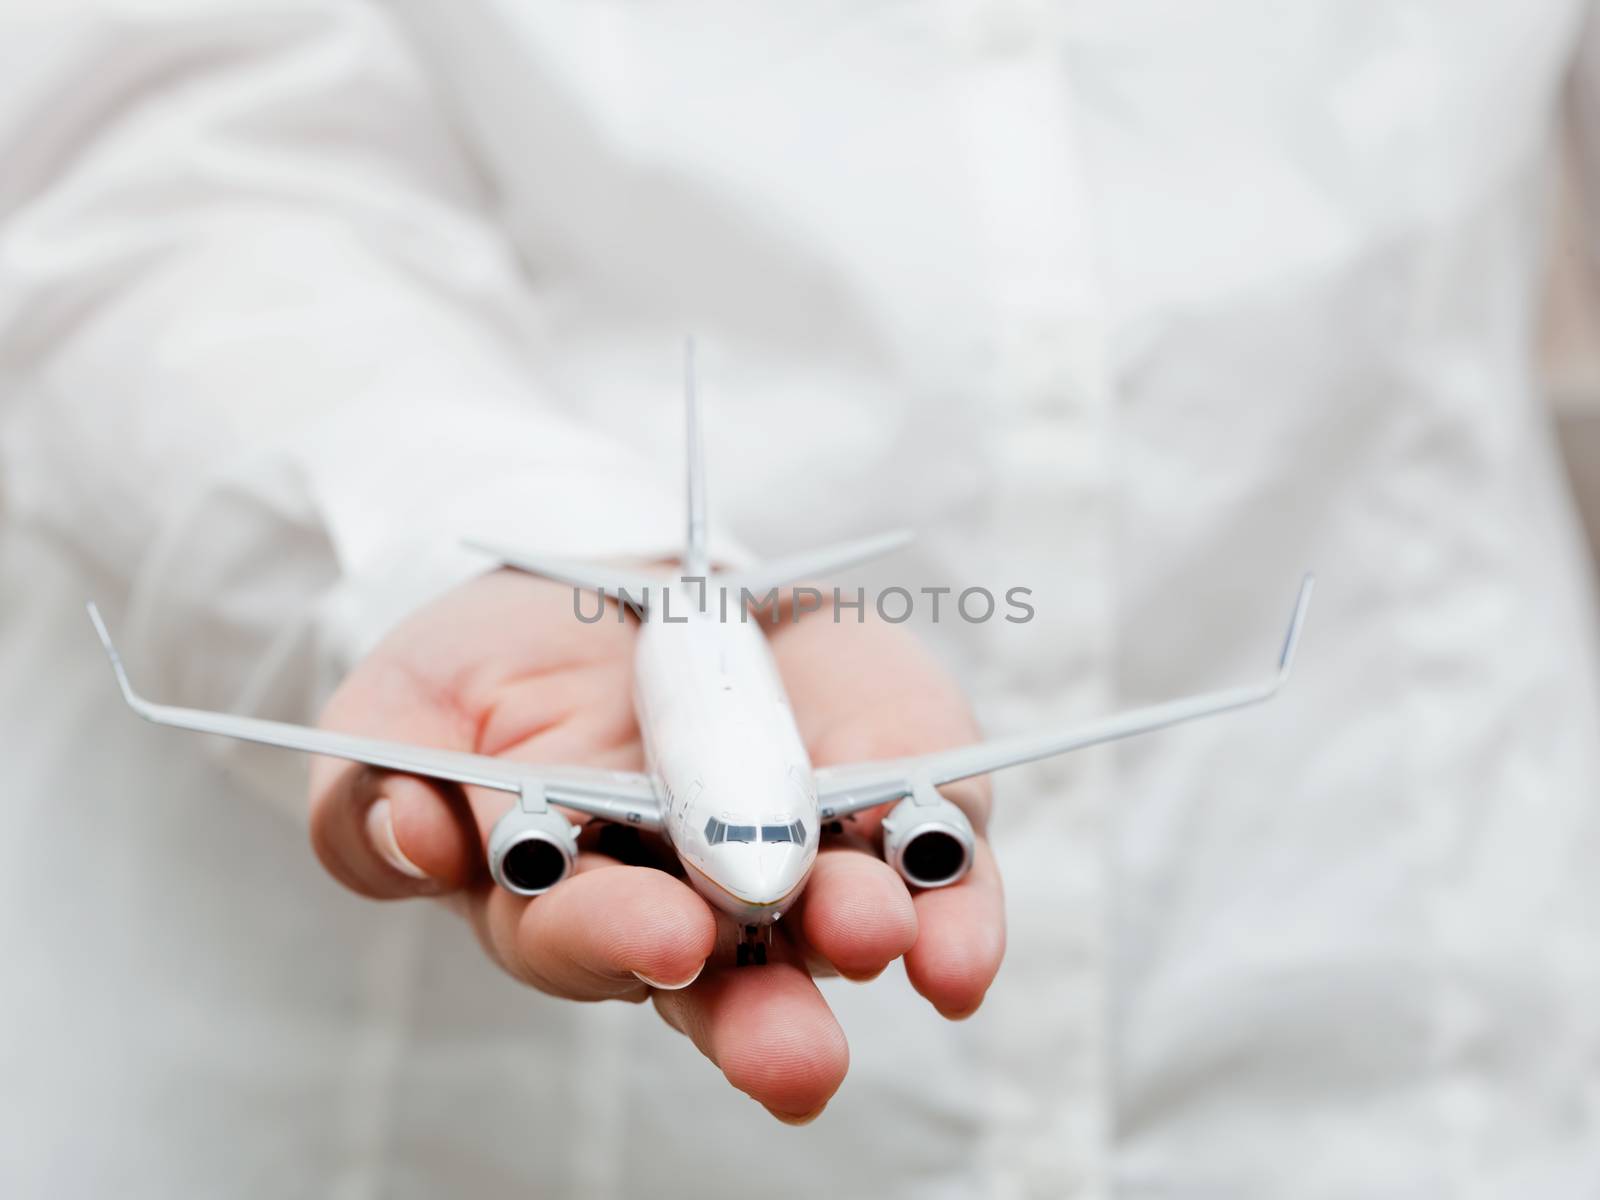 A business person holding an airplane model in hand. Concepts of aerial transport, aircraft industry, airline company.